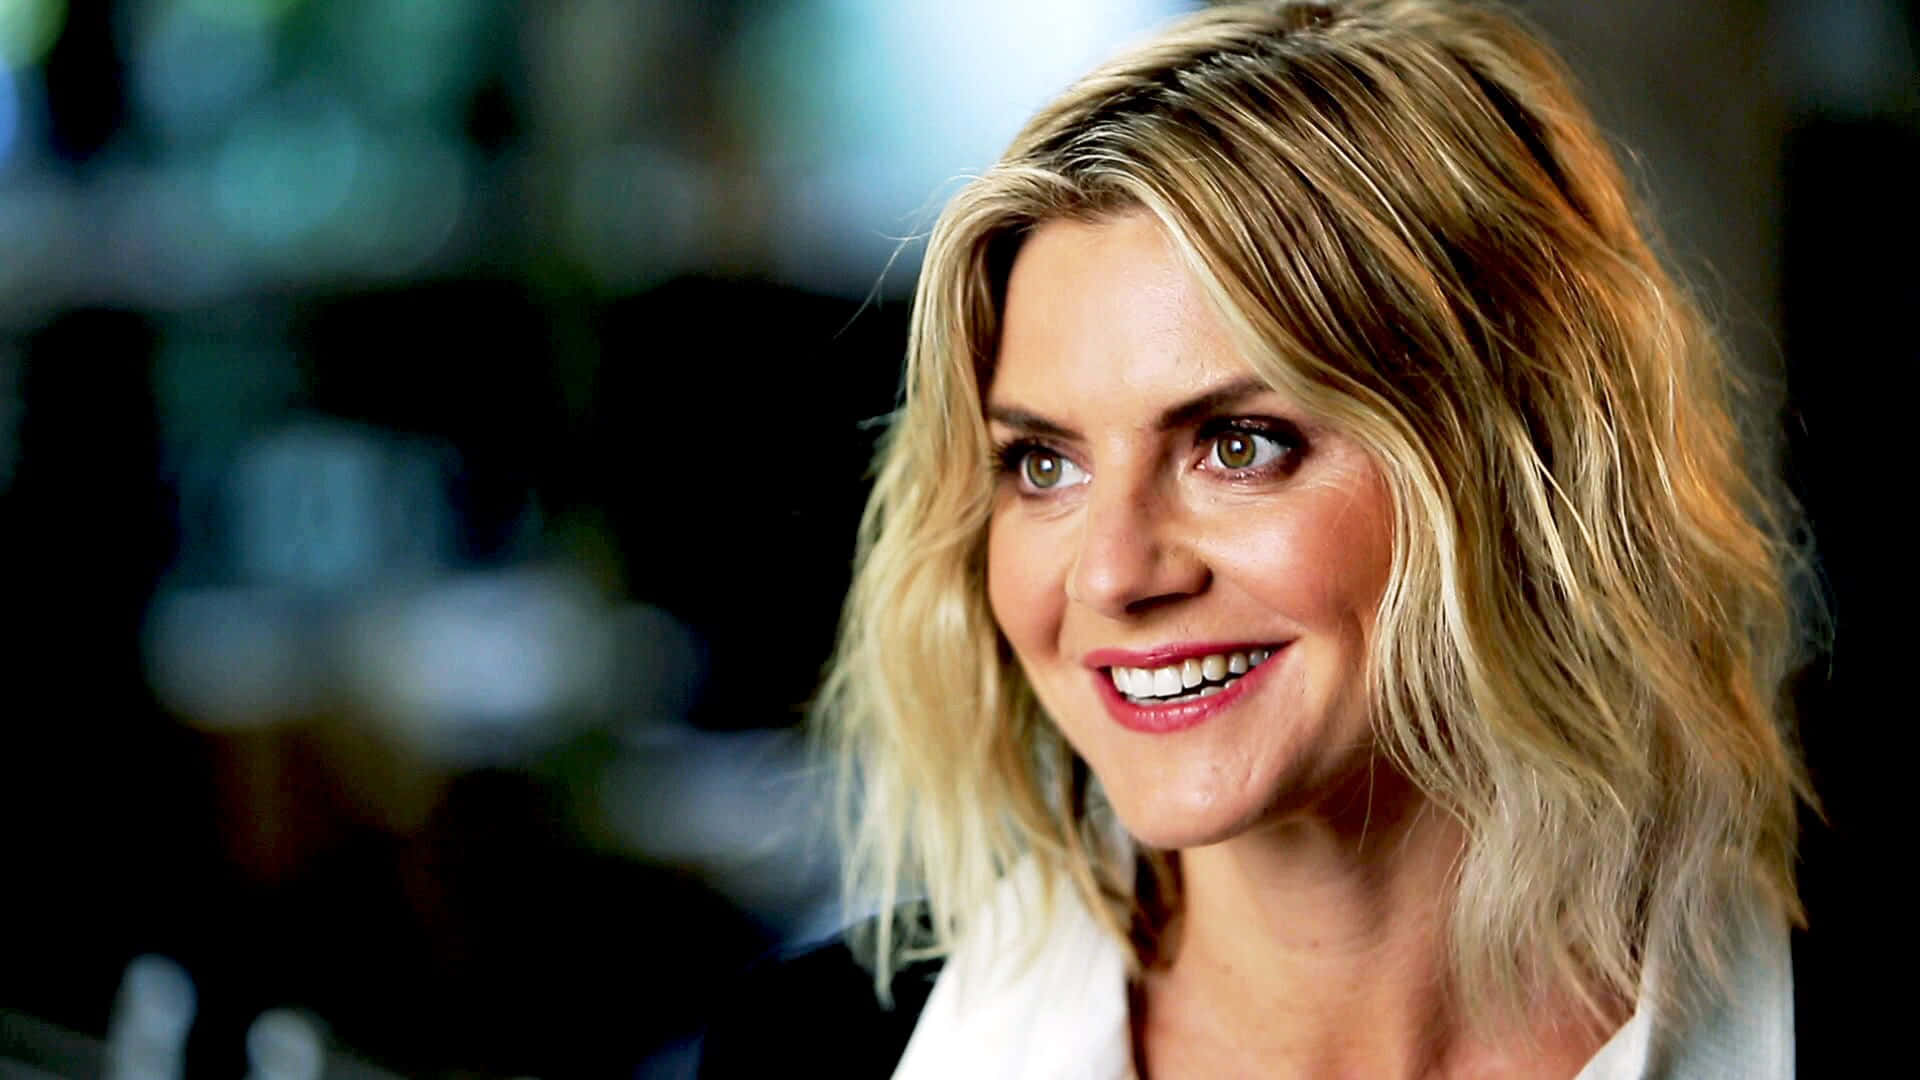 Radiant Eliza Coupe In A Casual Pose